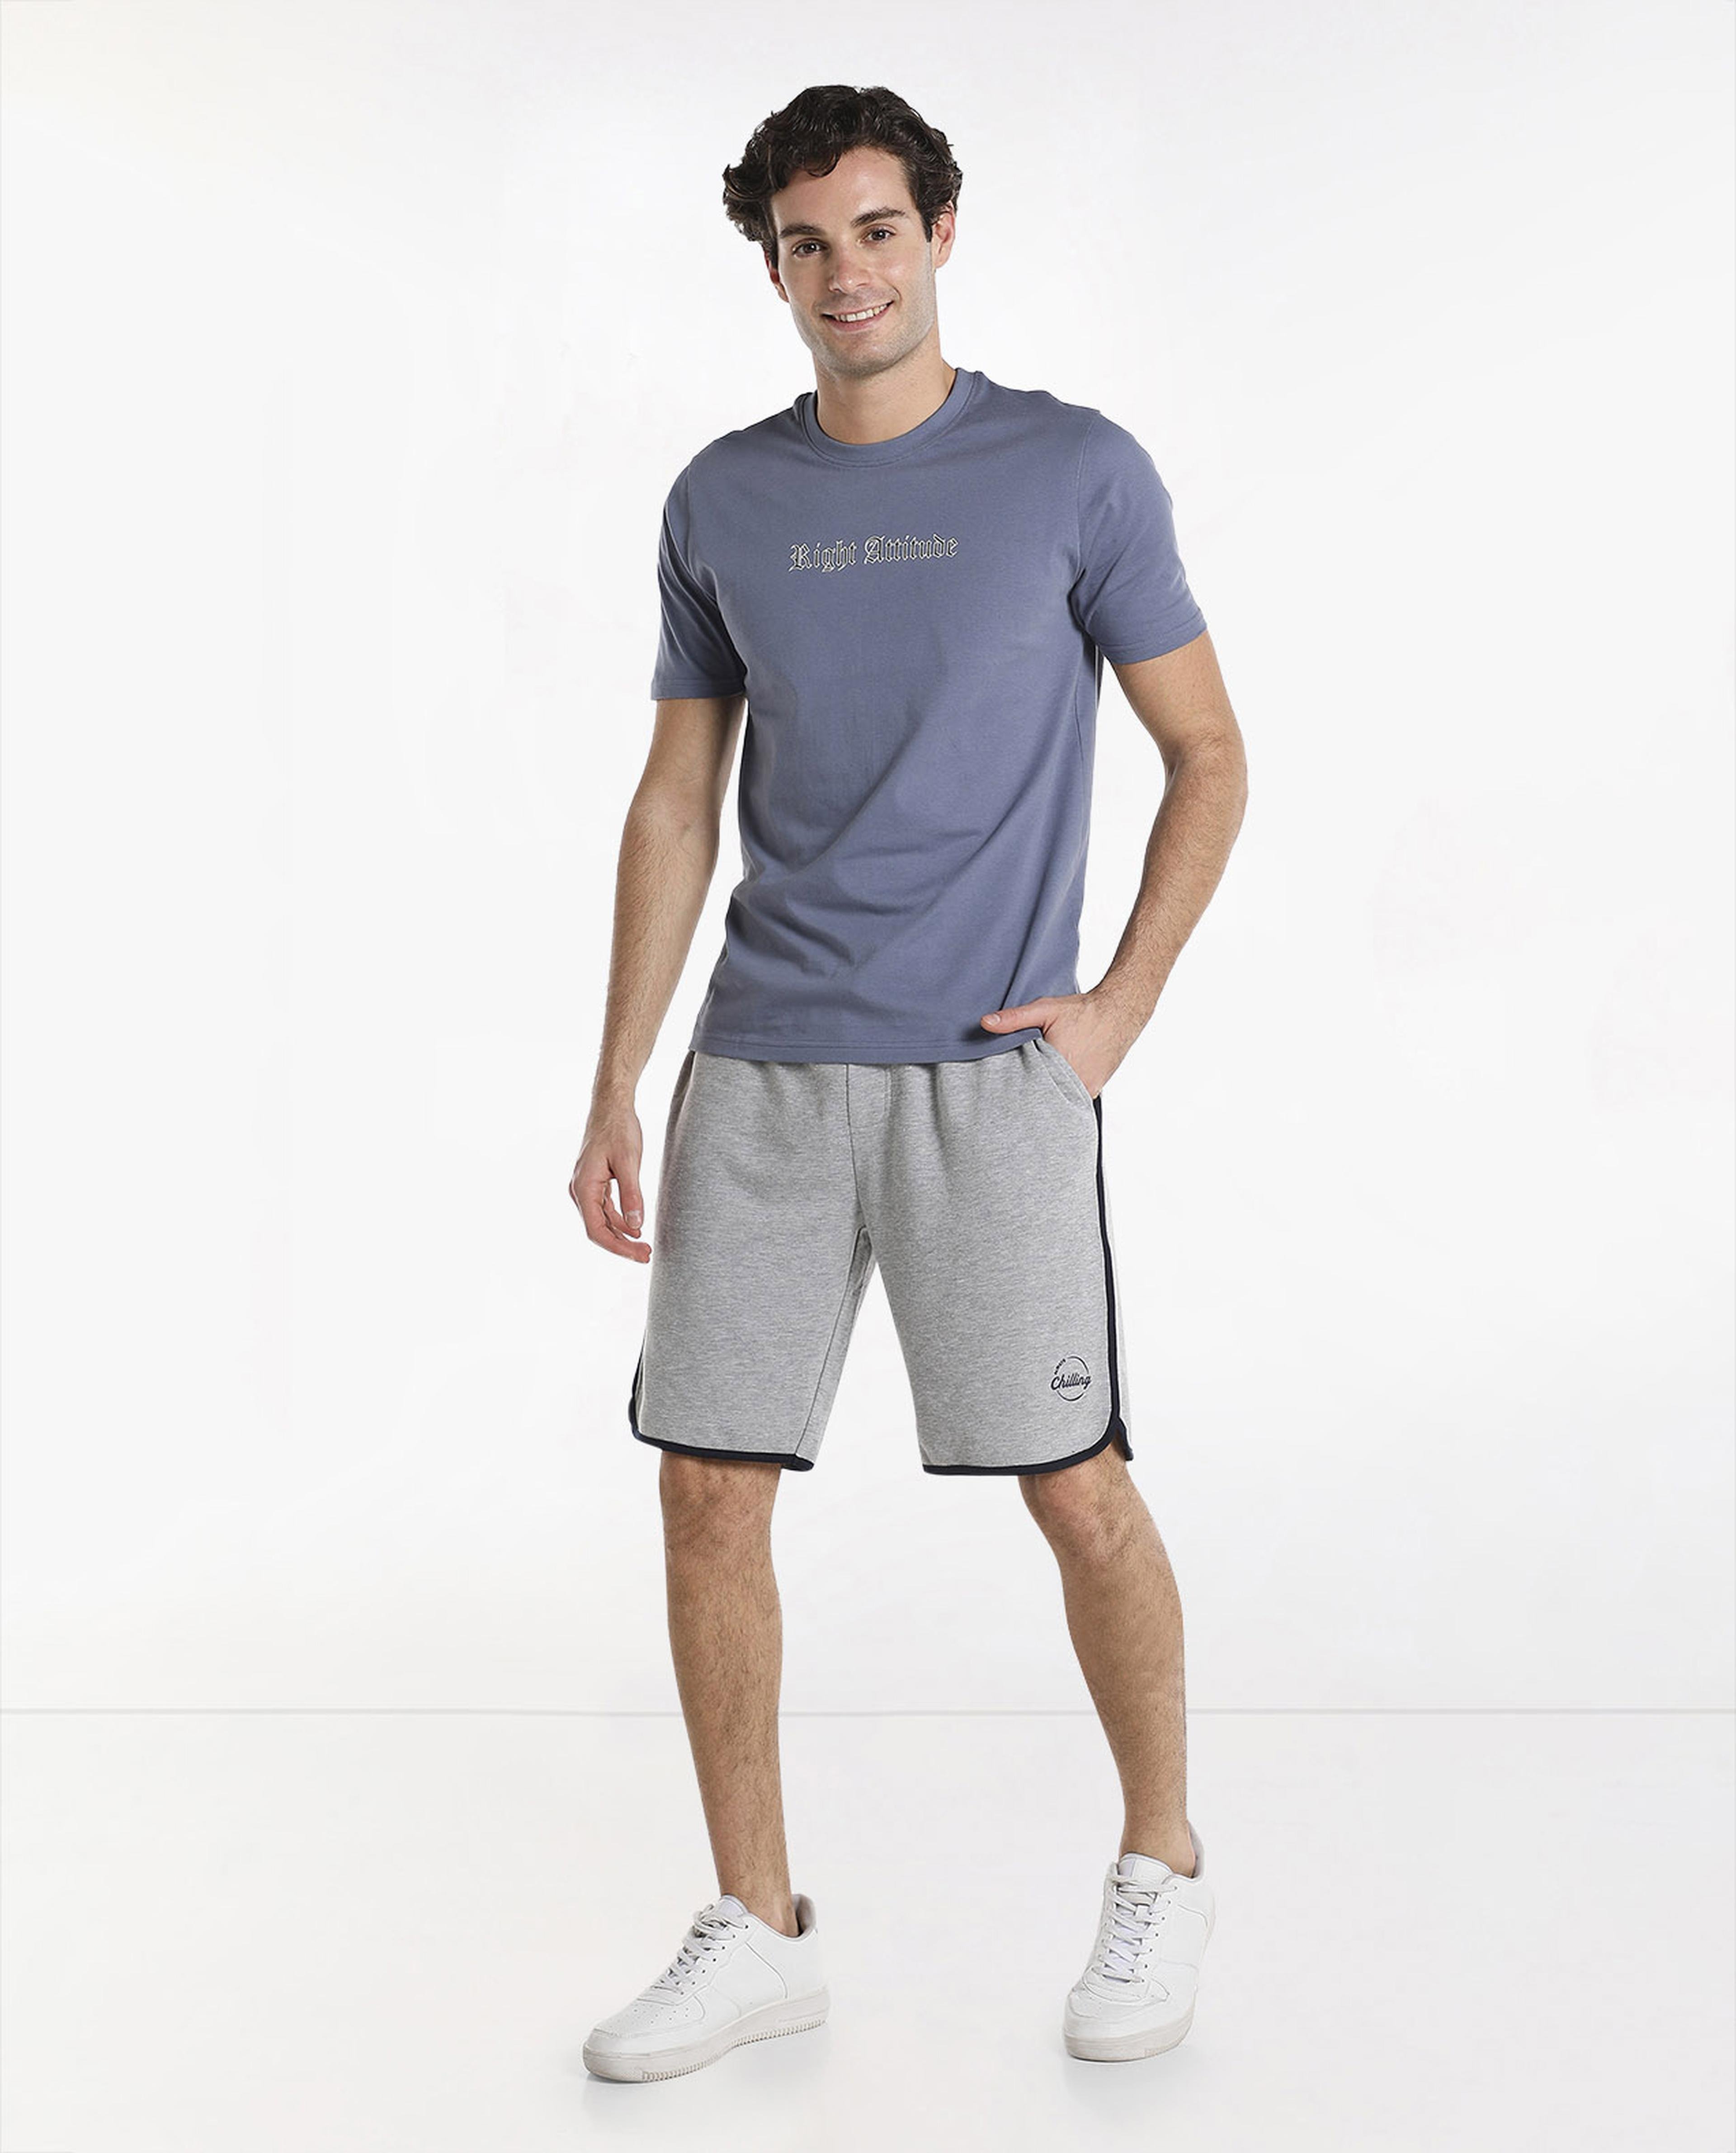 Regular Fit Casual Shorts with Drawstring Waist